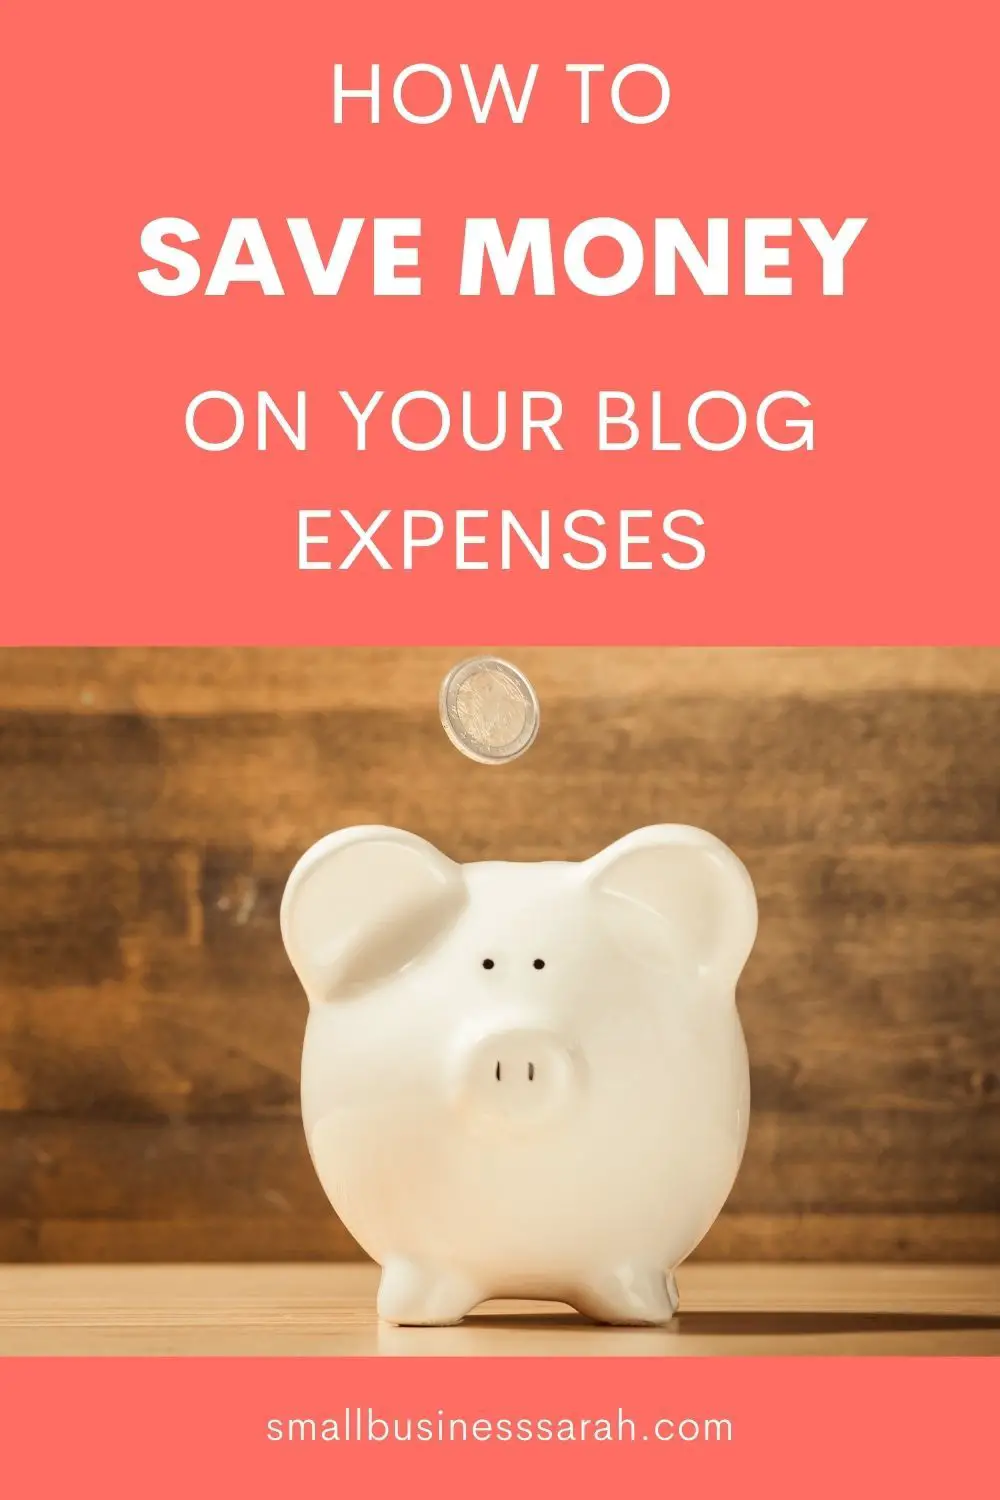 Wondering how you can save money on your blog expenses? Check out this post that shows you have keeping good records can save you money.